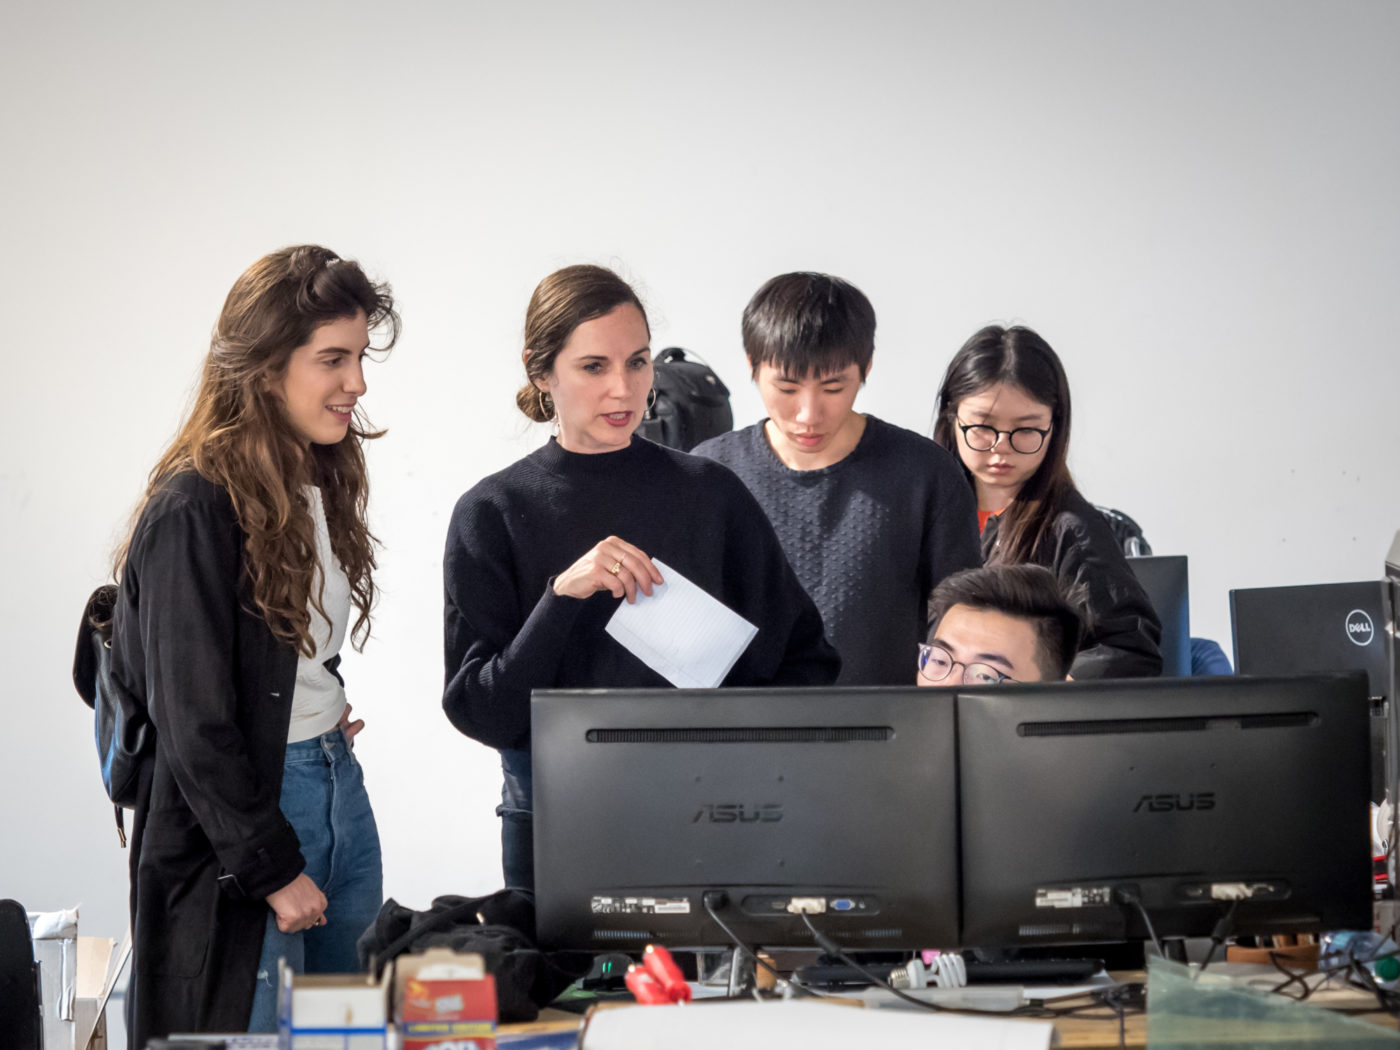 Group of students around computer discussing with florencia pita in architecture school